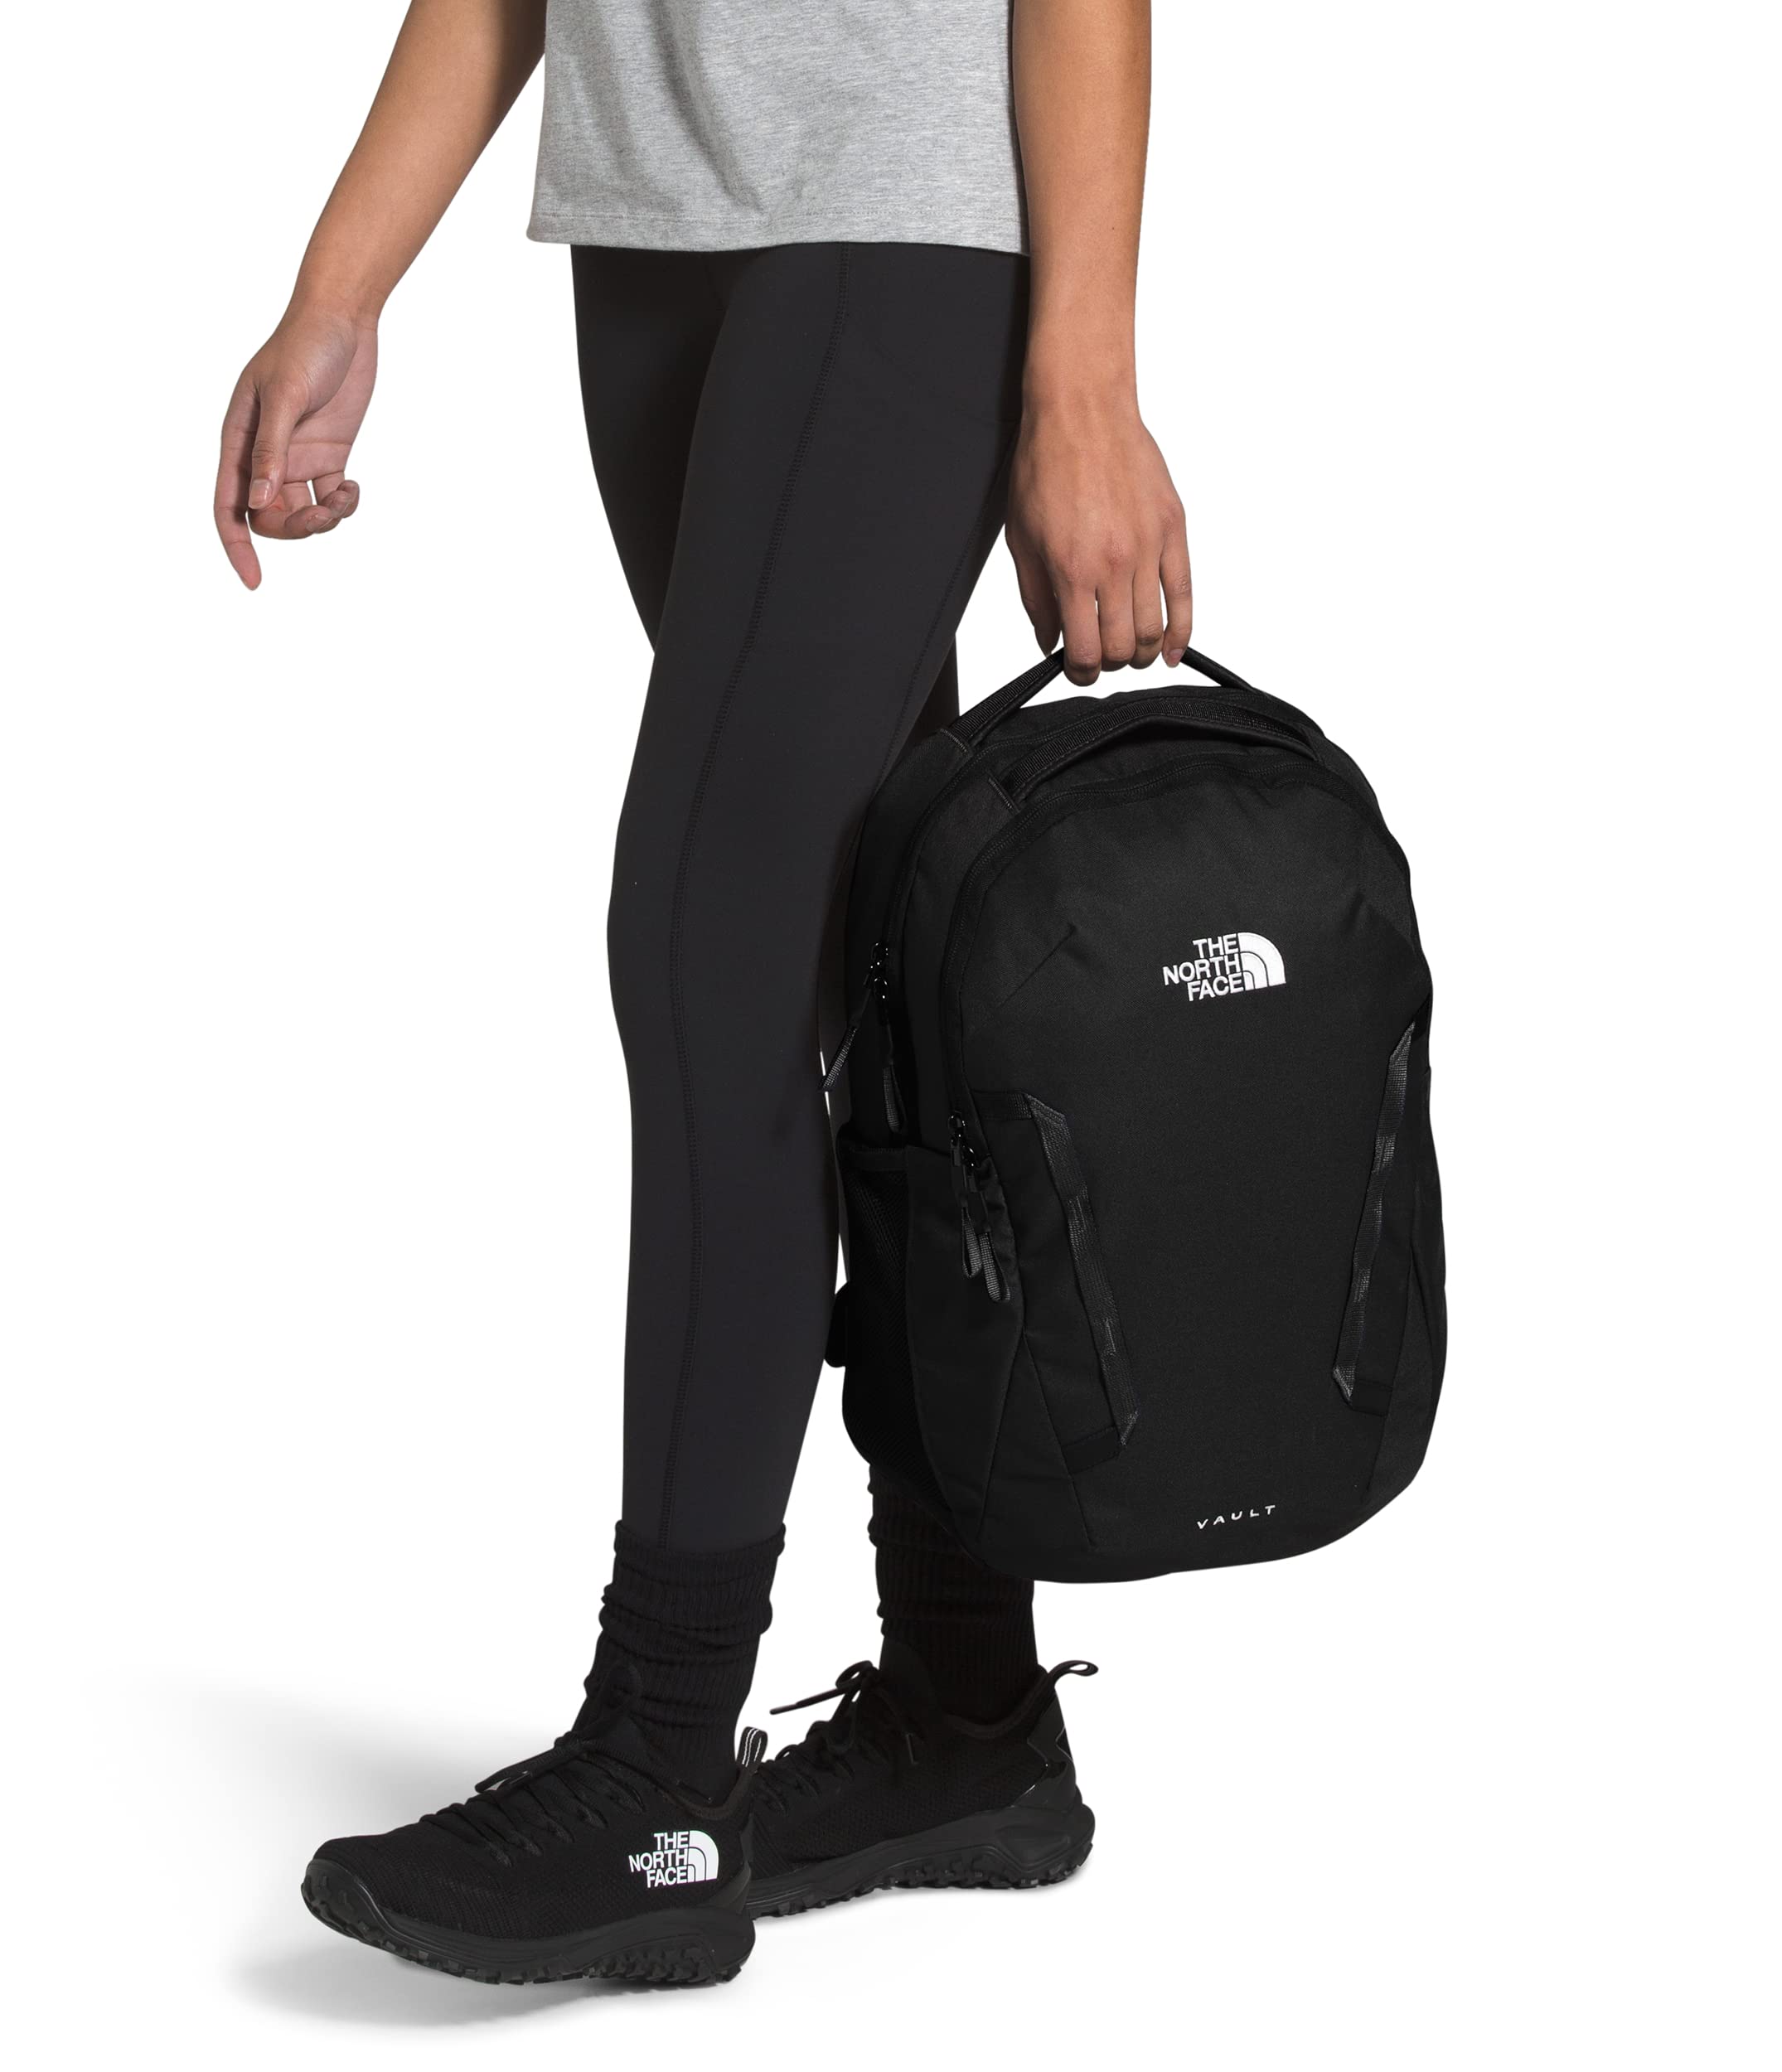 THE NORTH FACE Women's Vault Laptop Backpack, Tnf Black, One Size